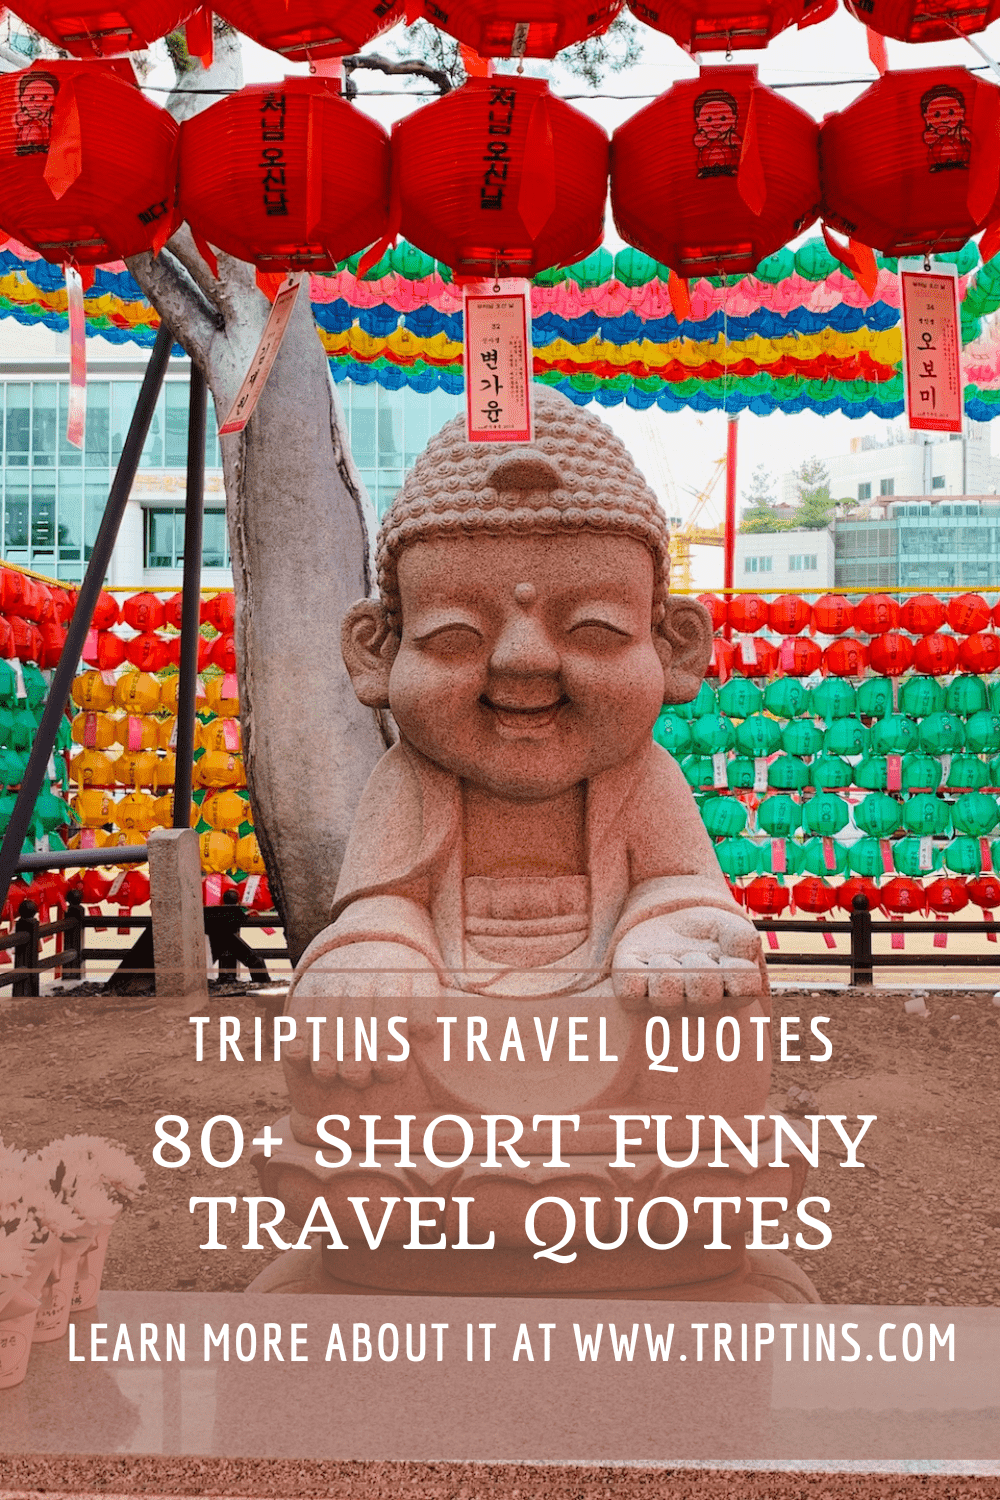 80+ Funny Travel Quotes to Make You Smile & Laugh | TripTins